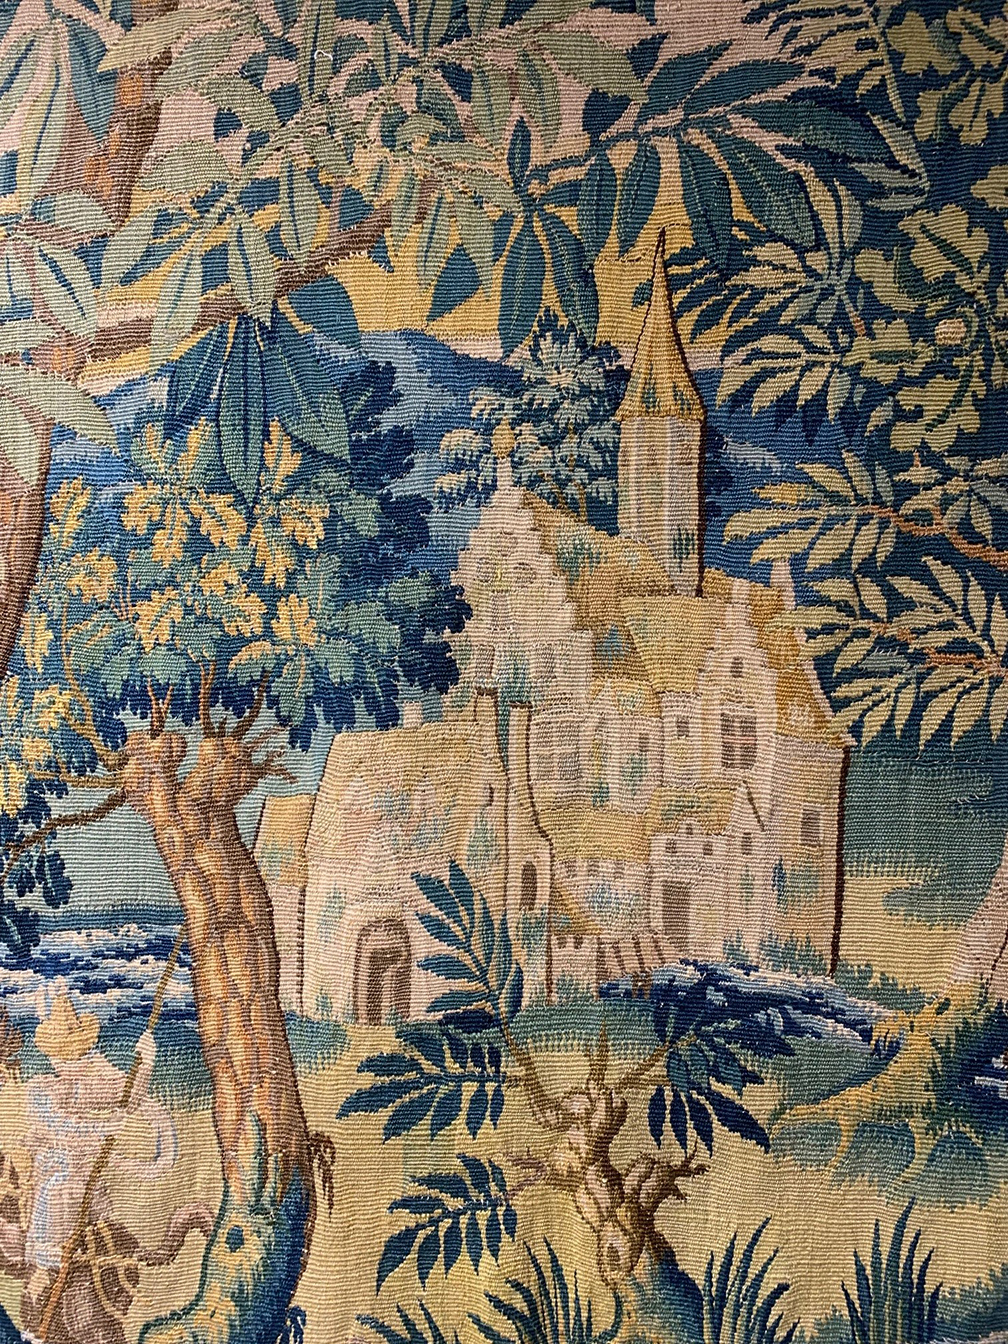 Antique tapestry - # 57492